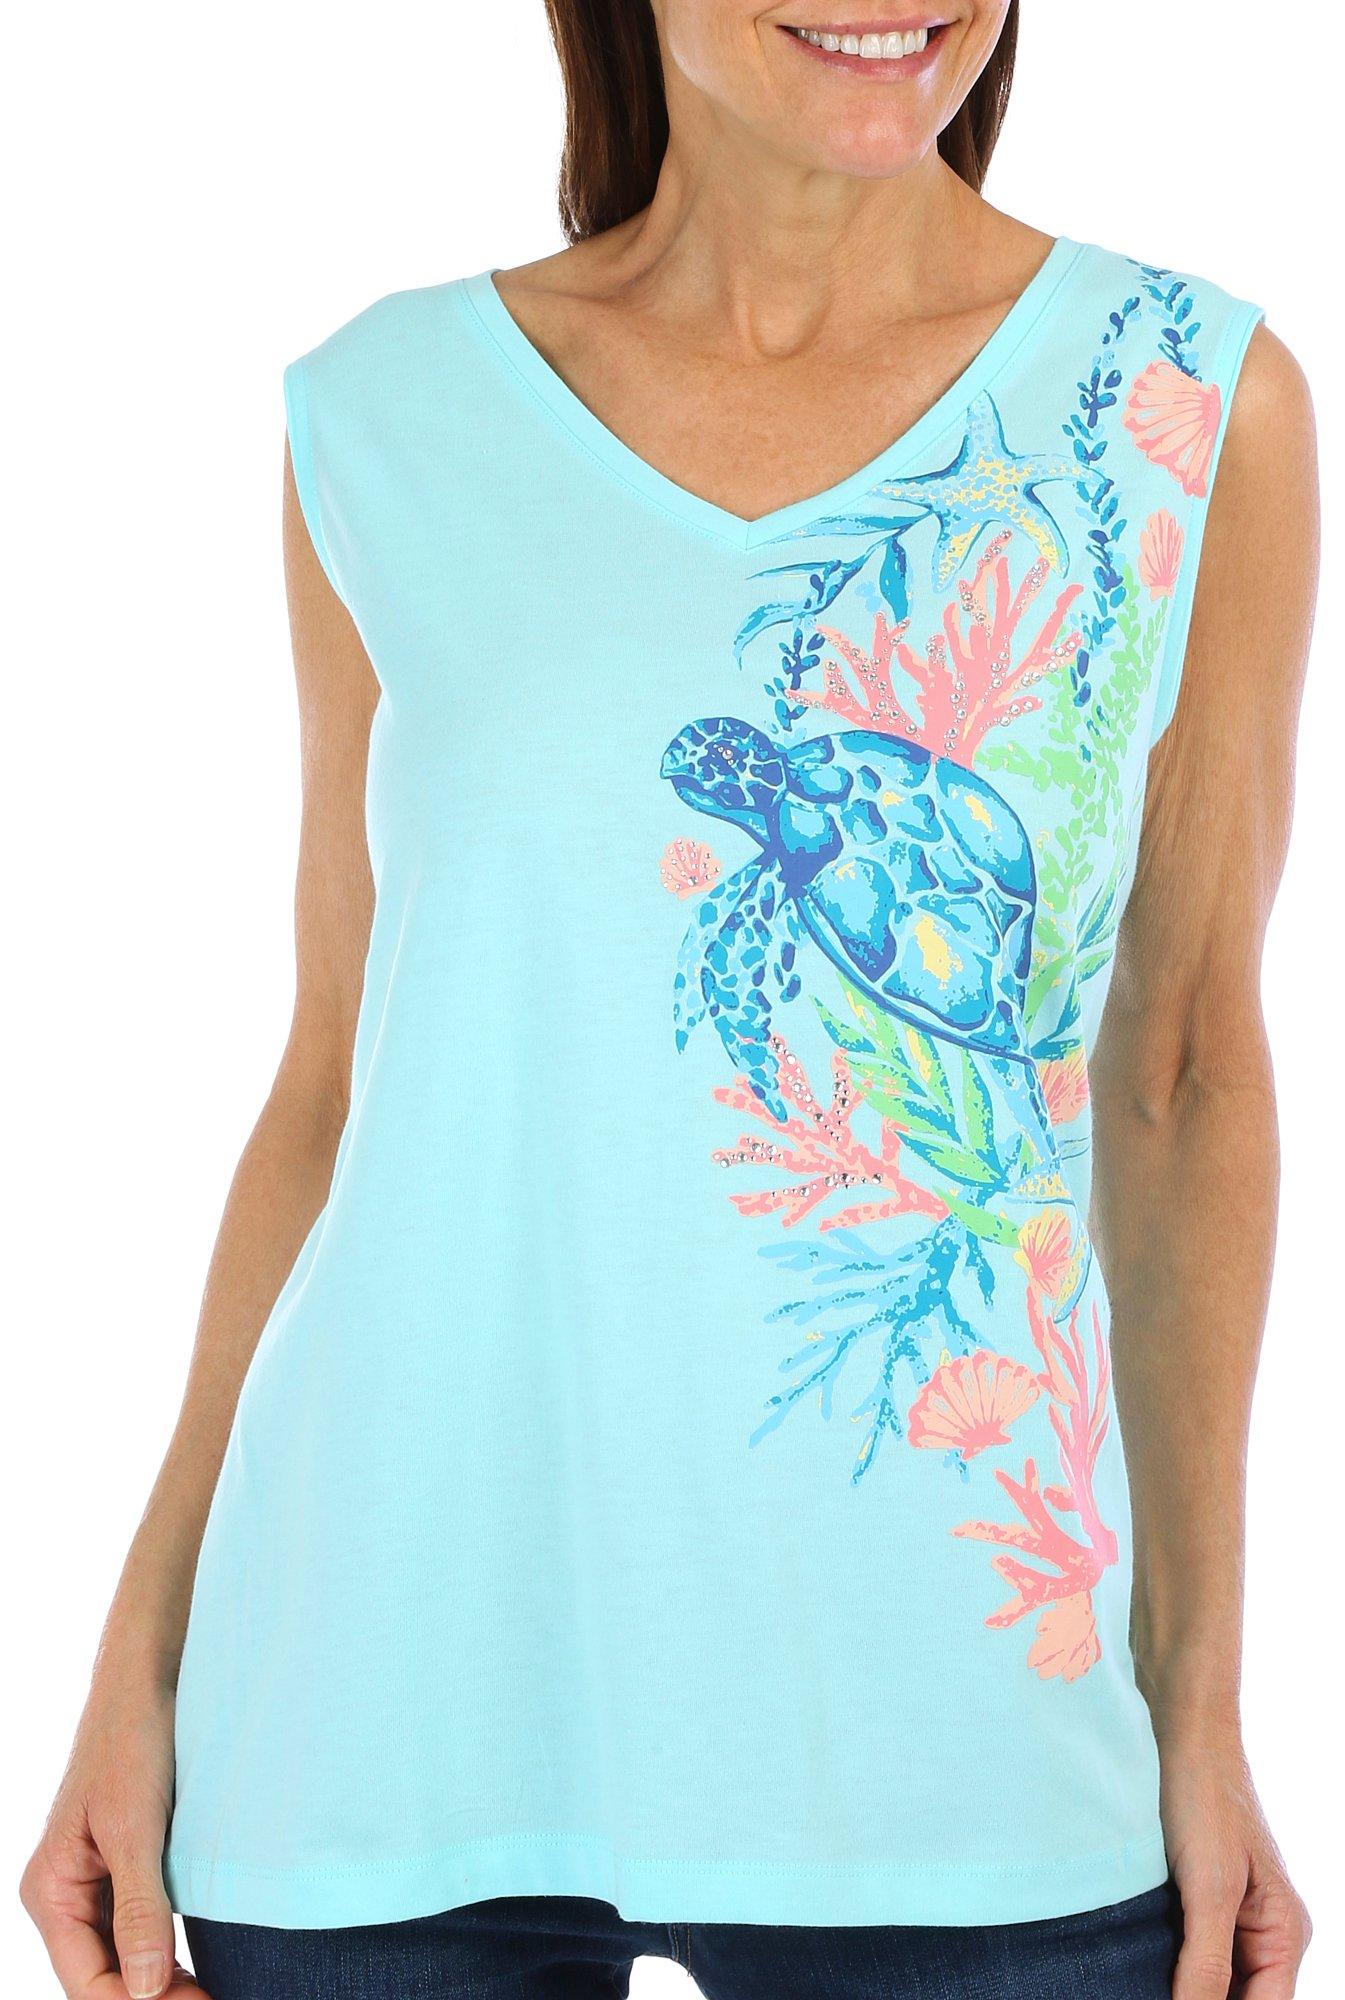 Coral Bay Womens Embellished Under Sea Sleeveless Top